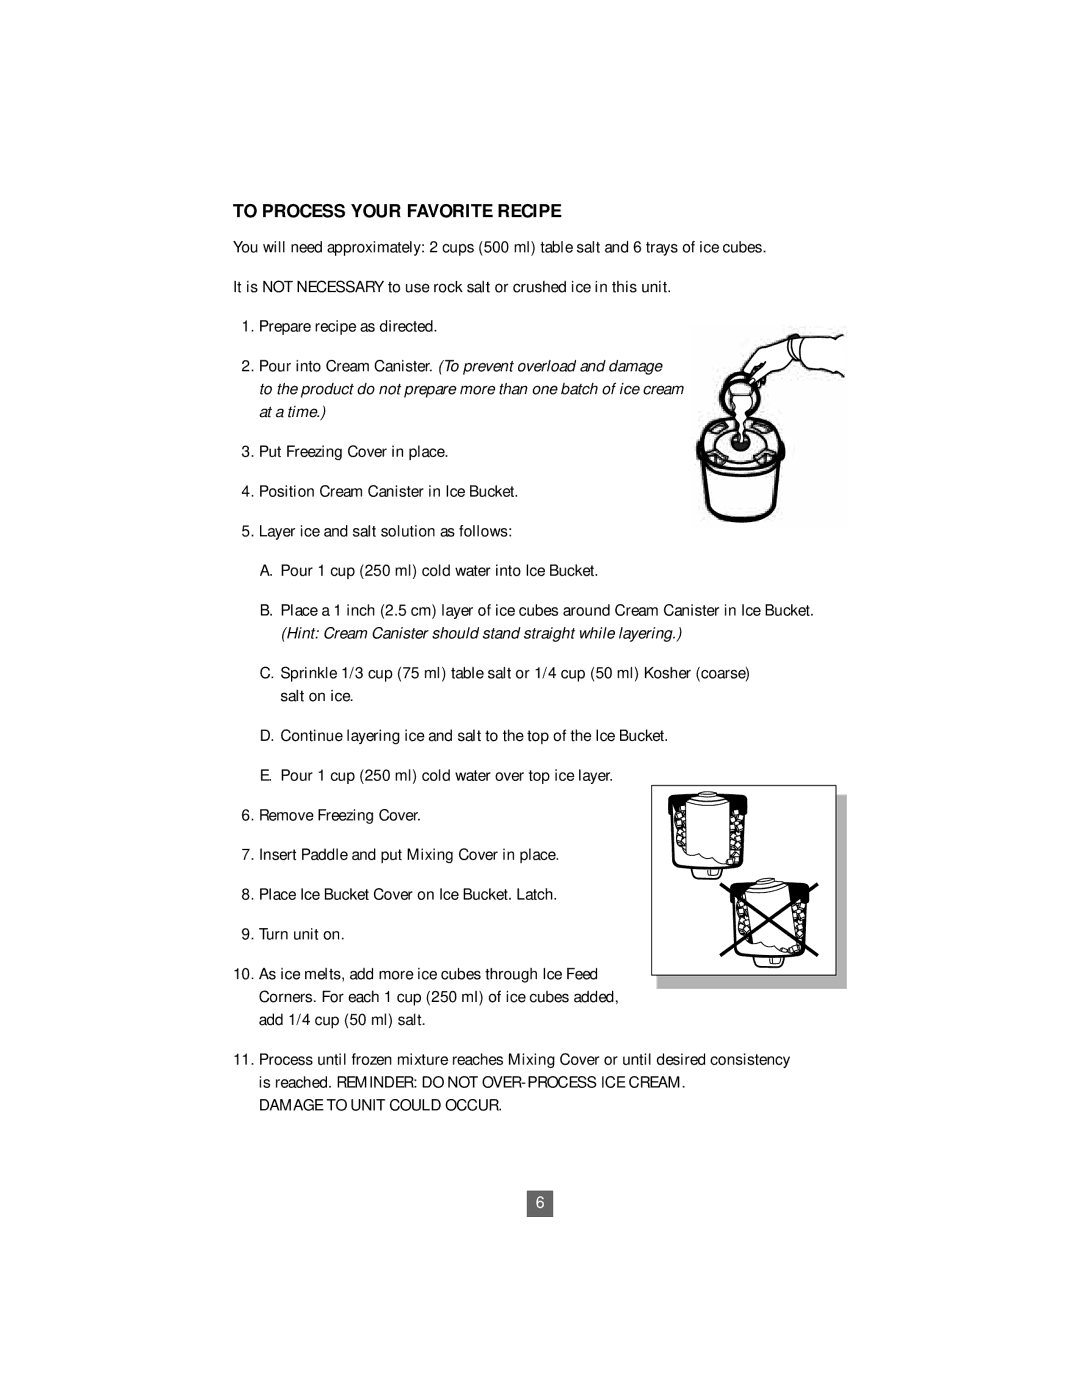 Oster 4746 instruction manual To Process Your Favorite Recipe, Damage to Unit could Occur 